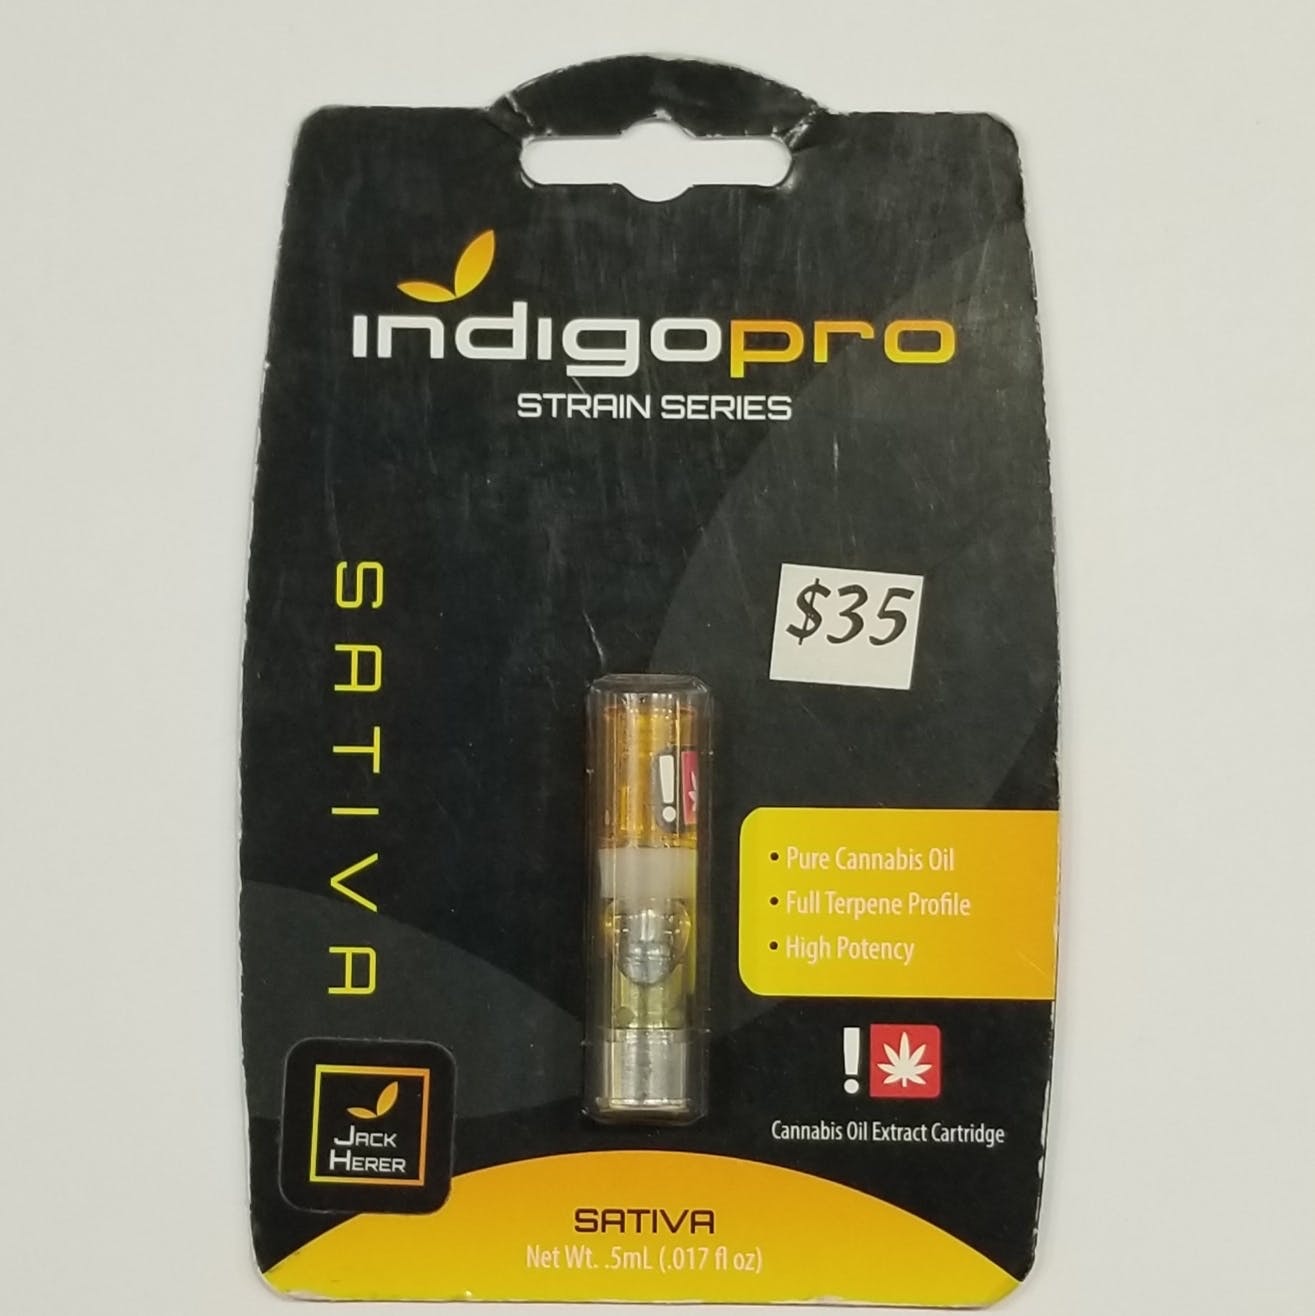 concentrate-5g-jack-herer-cartridge-airo-pro